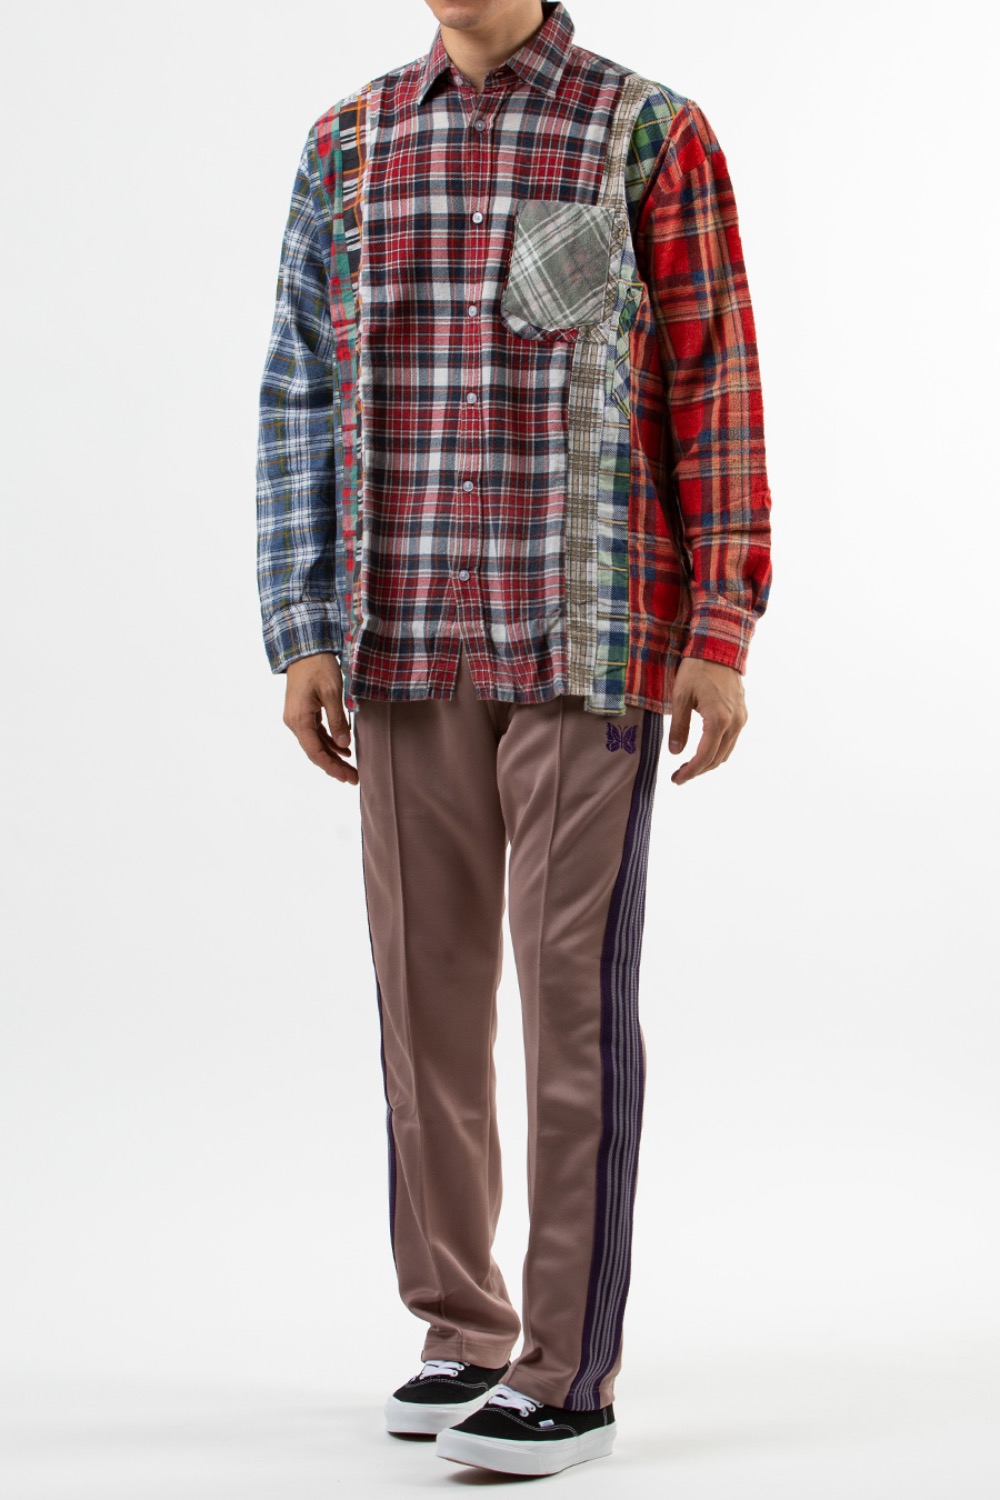 (22FW) - LQ306 Rebuild by Needles Flannel Shirt -&gt; 7 Cuts Wide Shirt (FREE - 10) ASSORTED